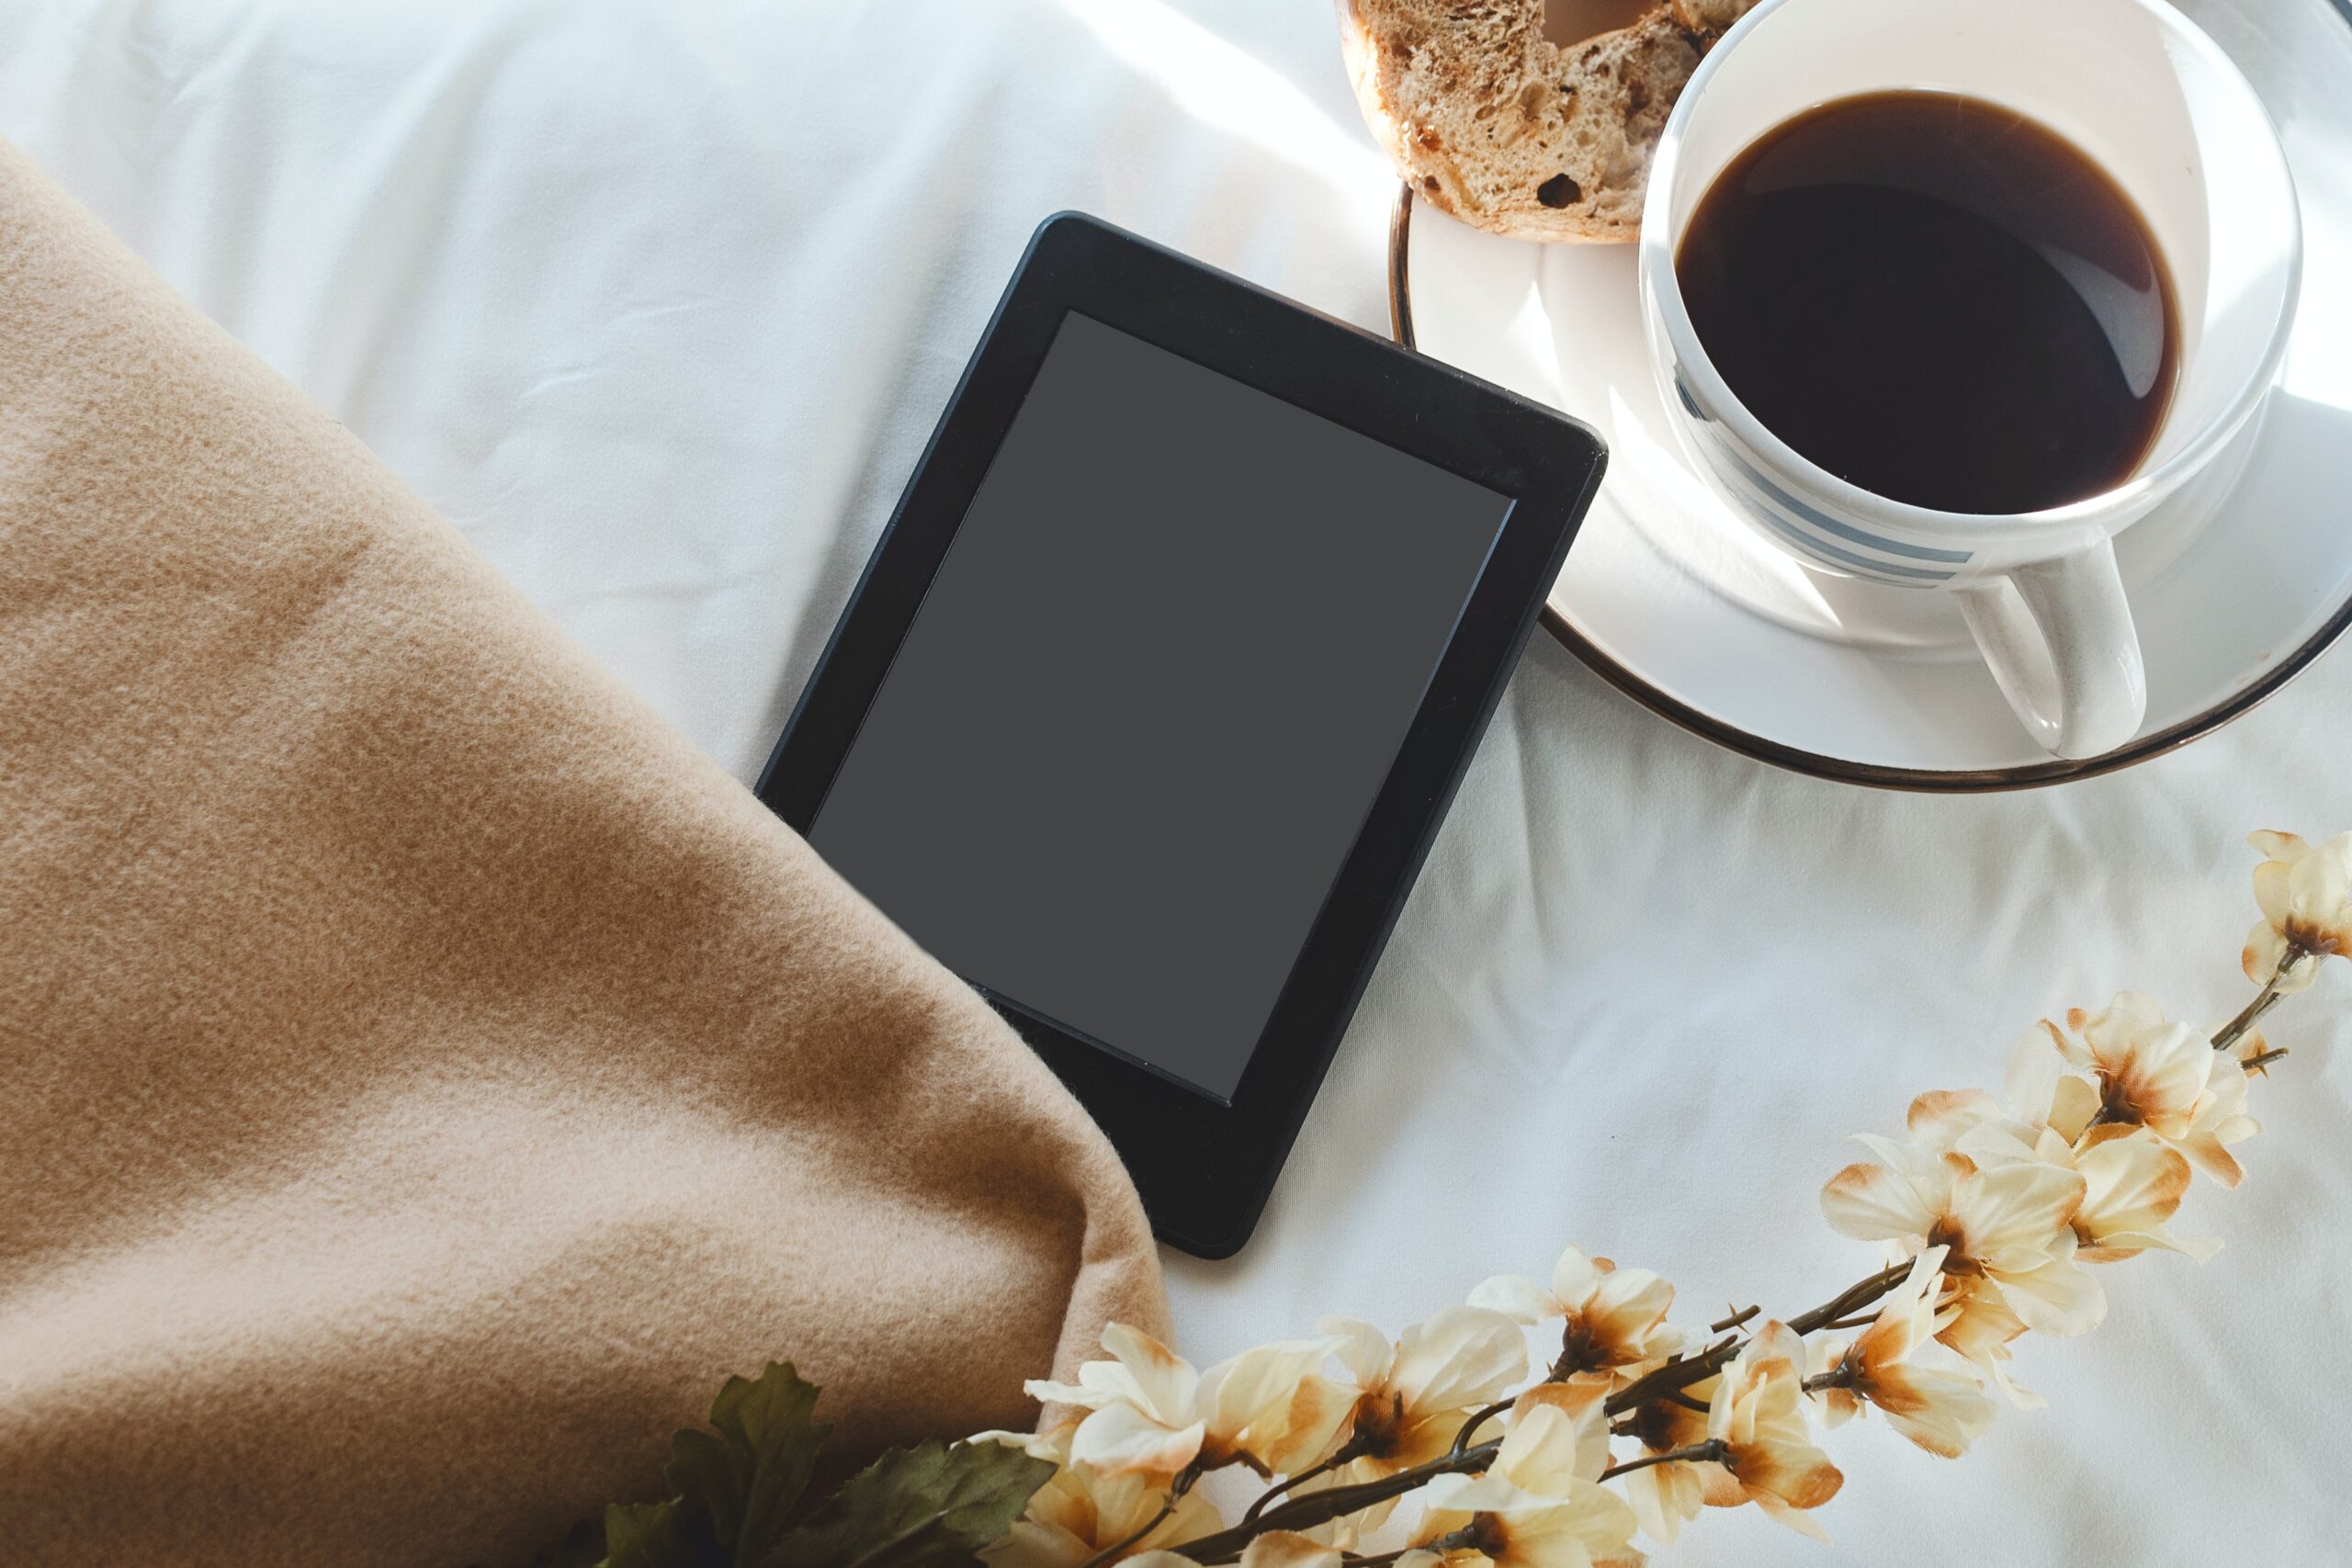 An eReader, next to a blanket, some flowers, and cup of tea and a muffin